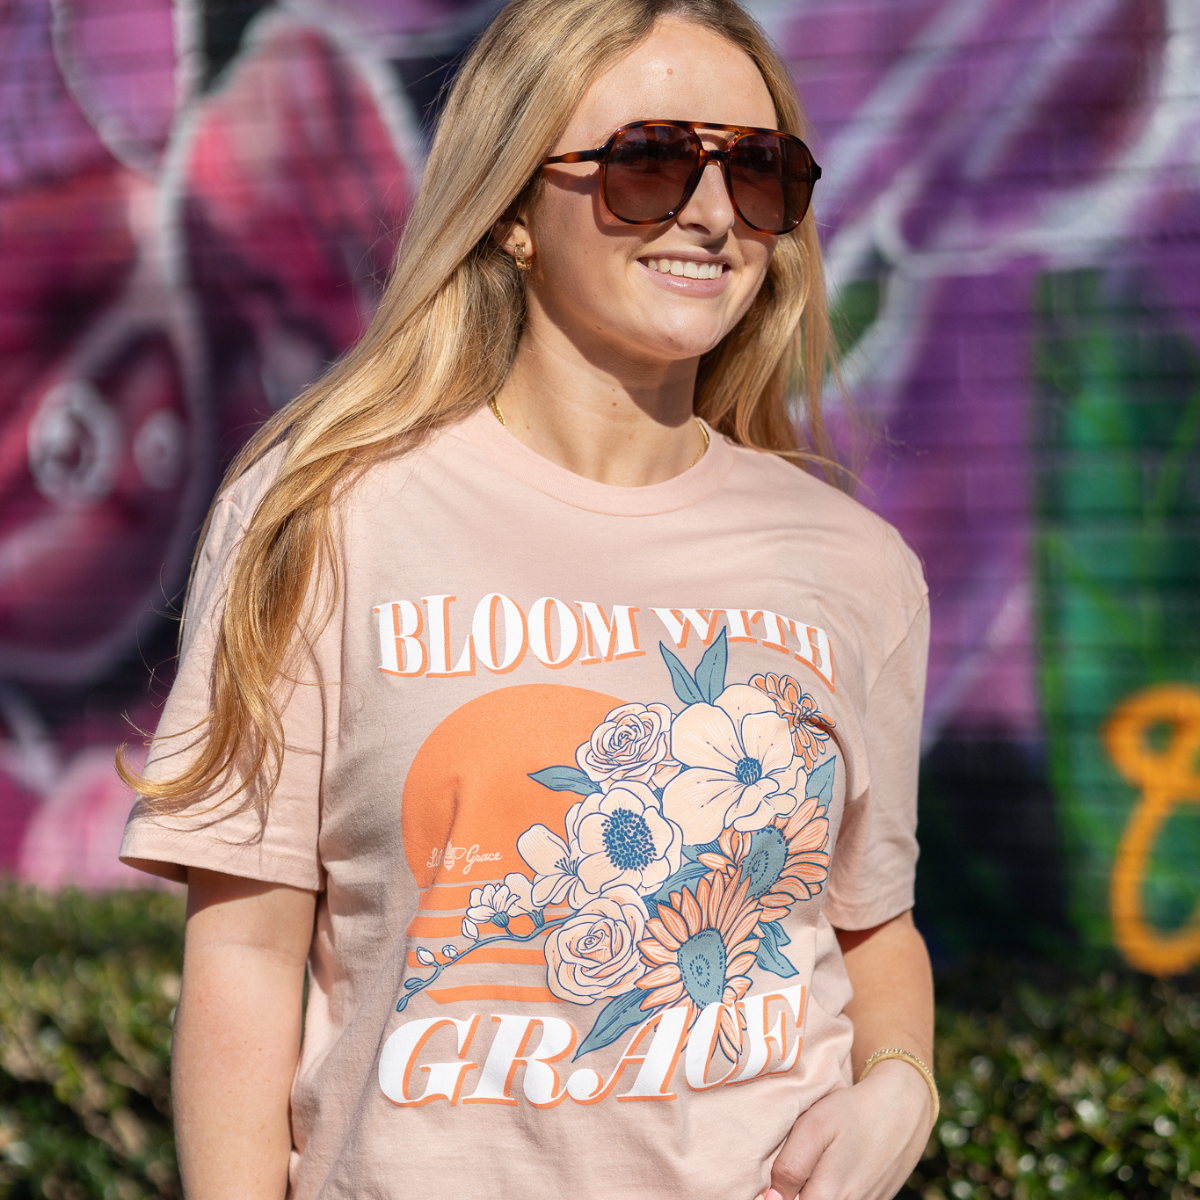 Bloom with Grace- Floral FRONT PRINT T-Shirt